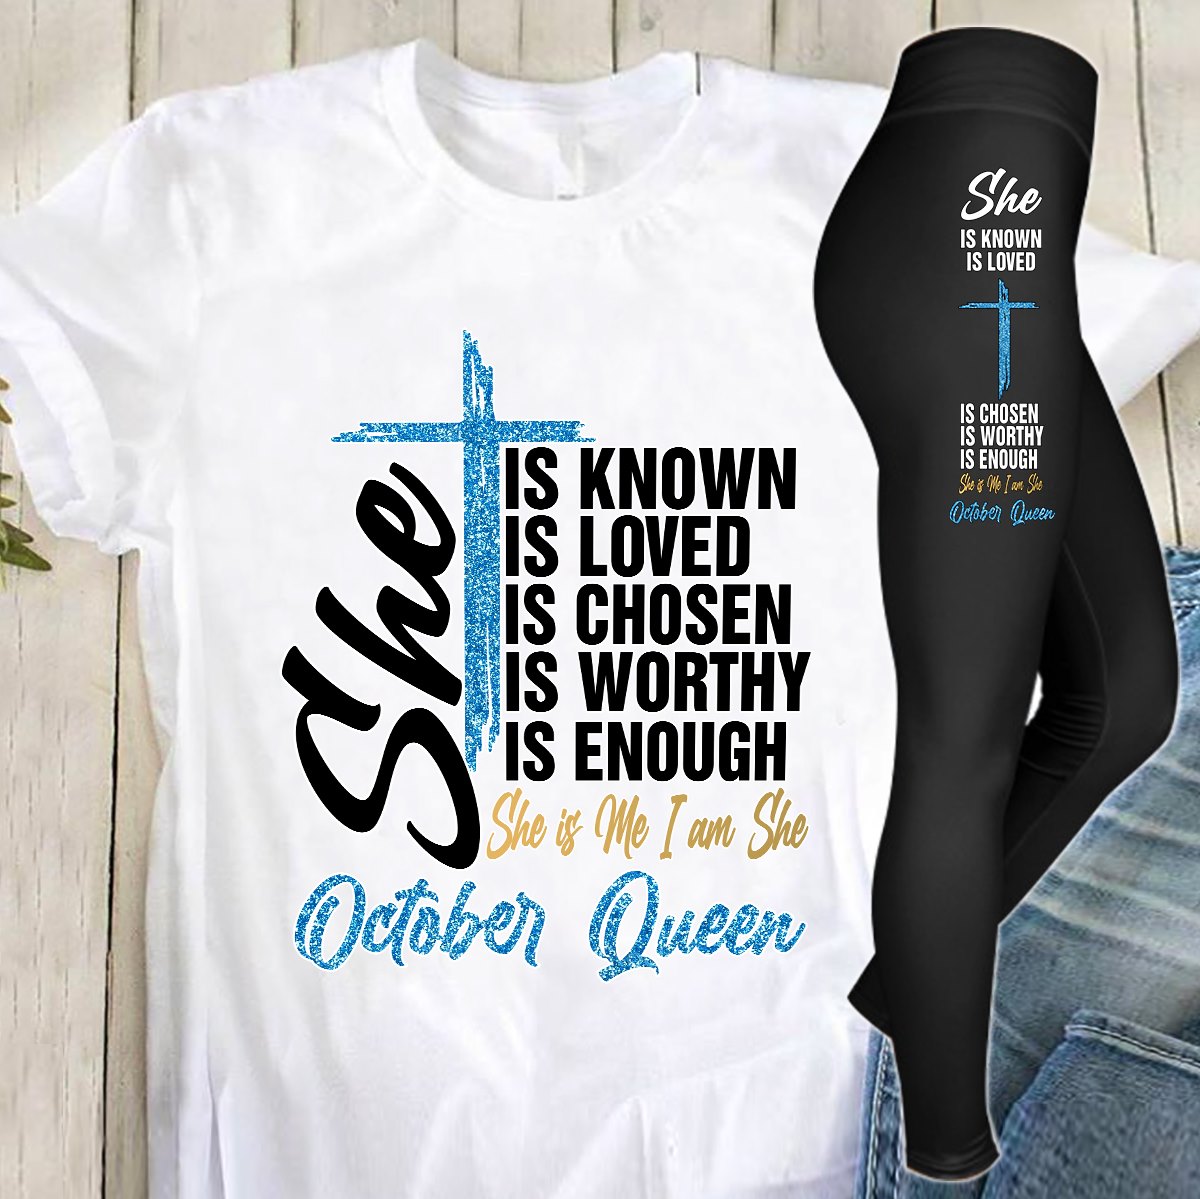 She is known, is loved, is chosen, is worthy, is enough she is me I am she - October queen